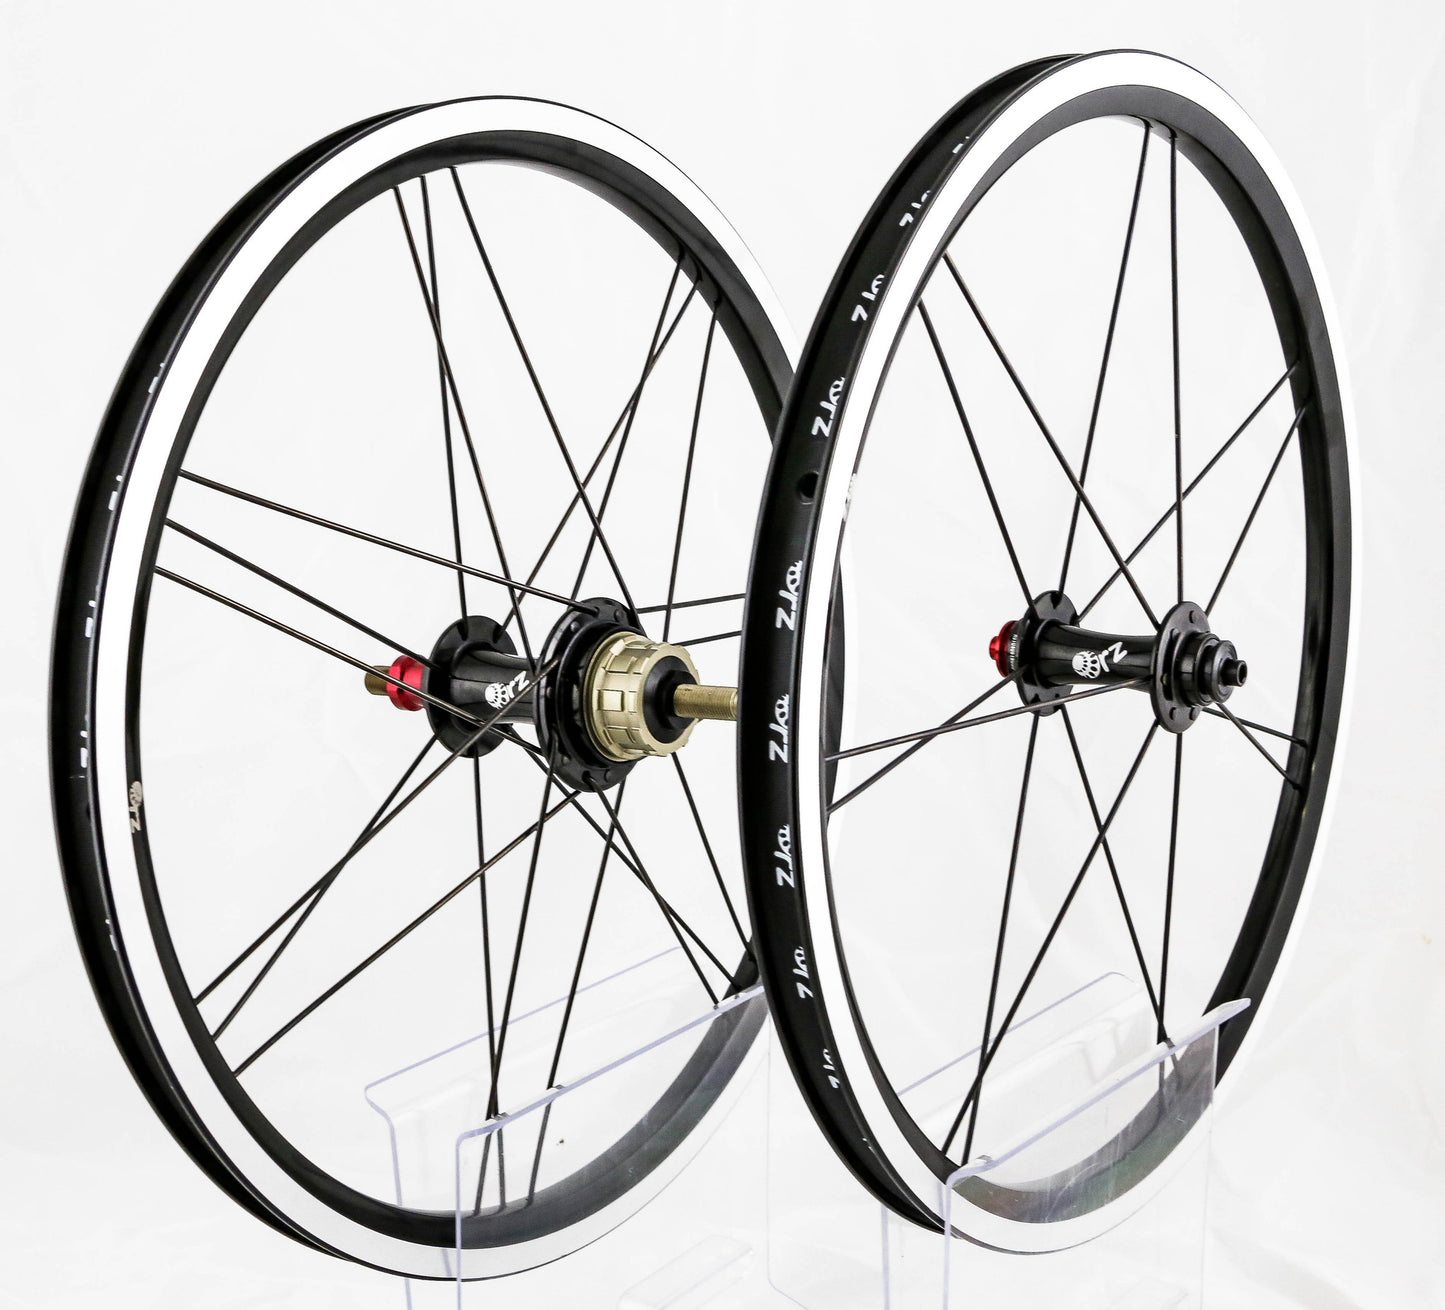 ORZ 2 speed wheelset Front 14 spokes And Rear 21 spokes